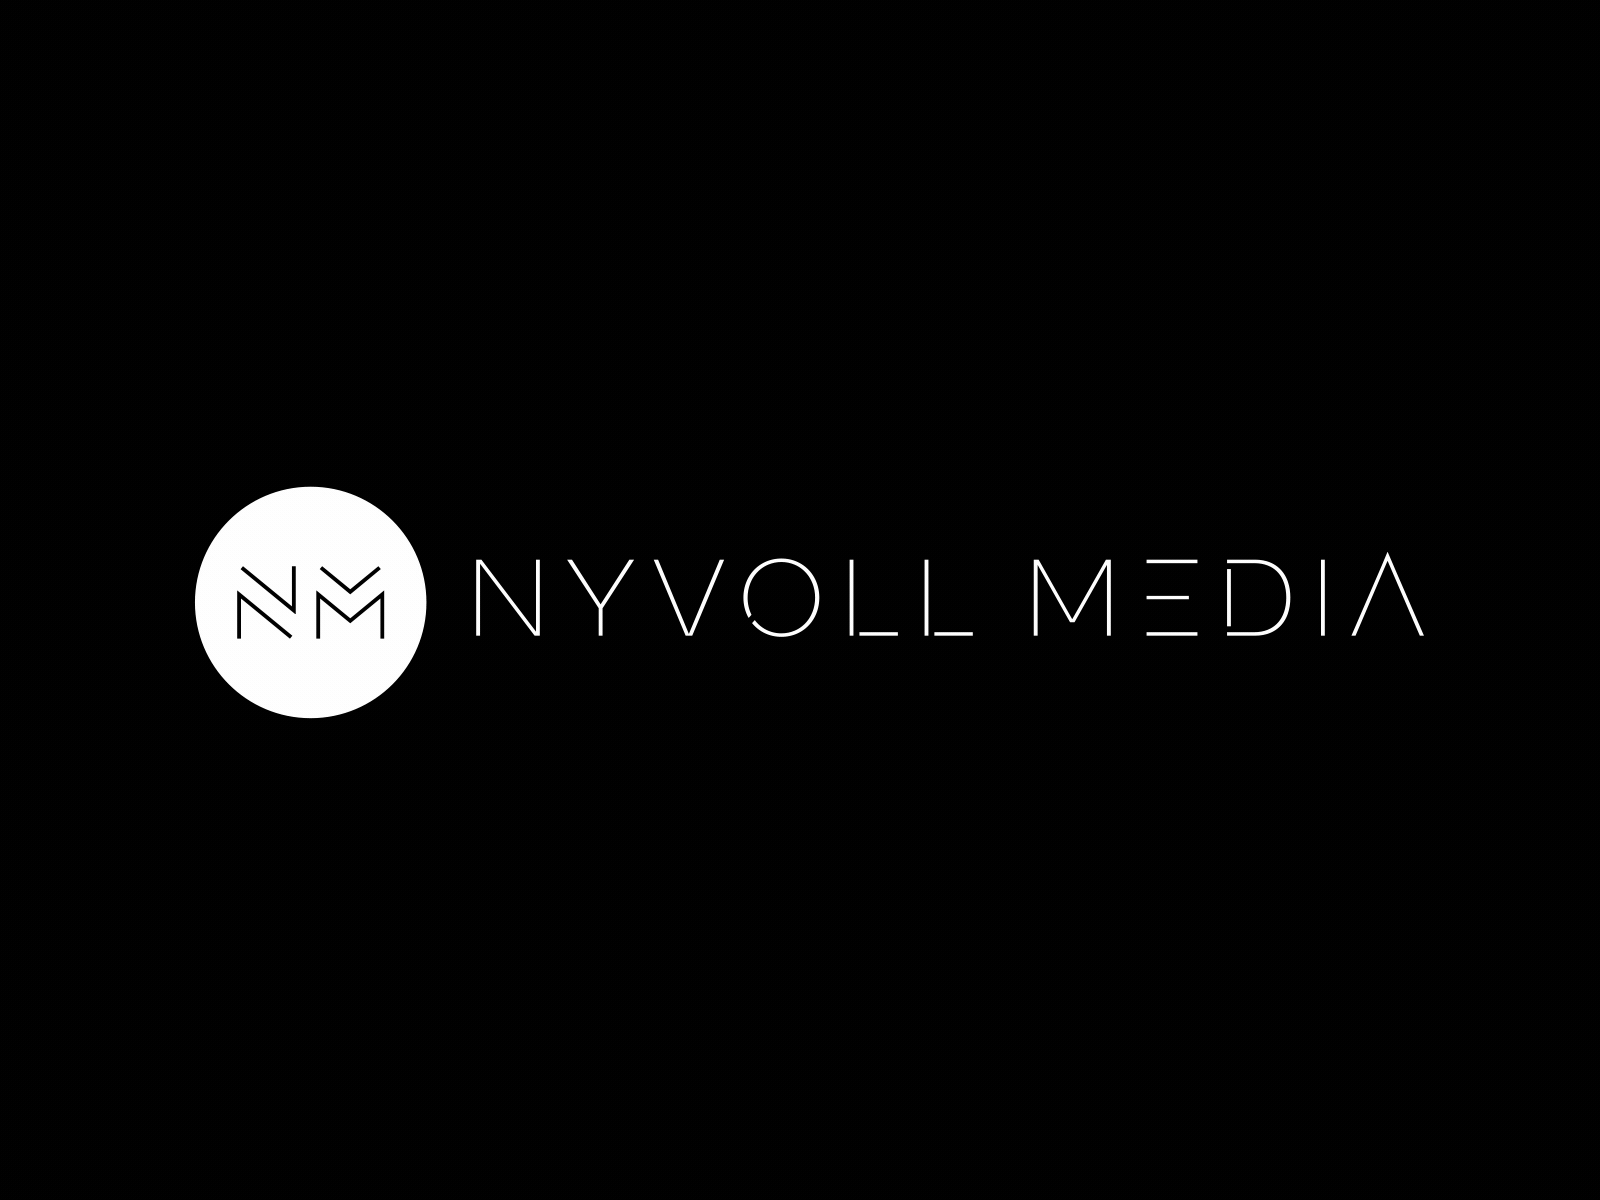 Nyvolle Media Logo Animation after effects animation animation 2d animation after effects animation design logo animation logo animations